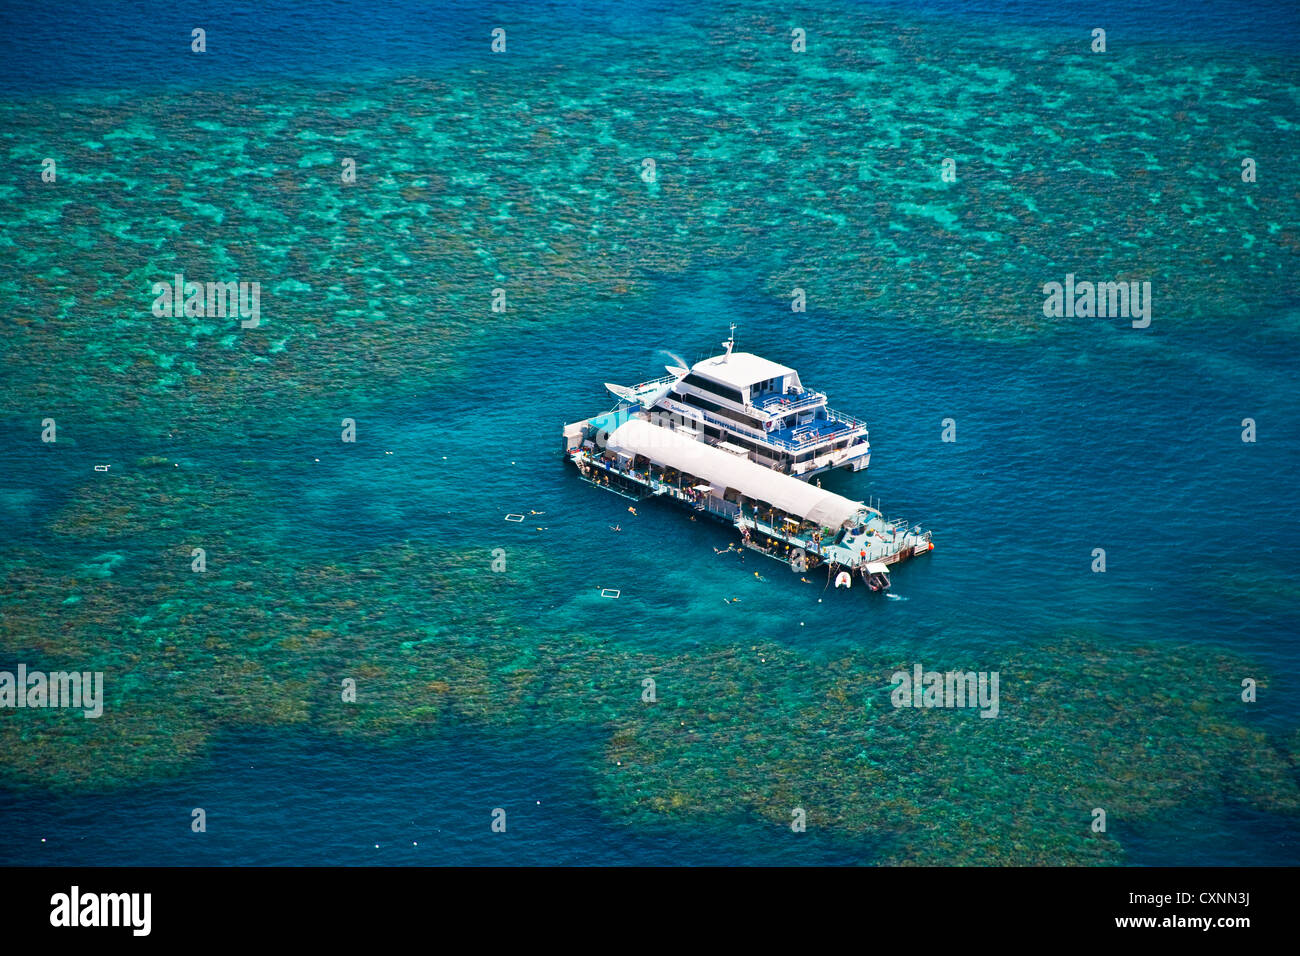 Aerial view of a tour boat docked at a pontoon at the Great Barrier Reef, Queensland, Australia Stock Photo